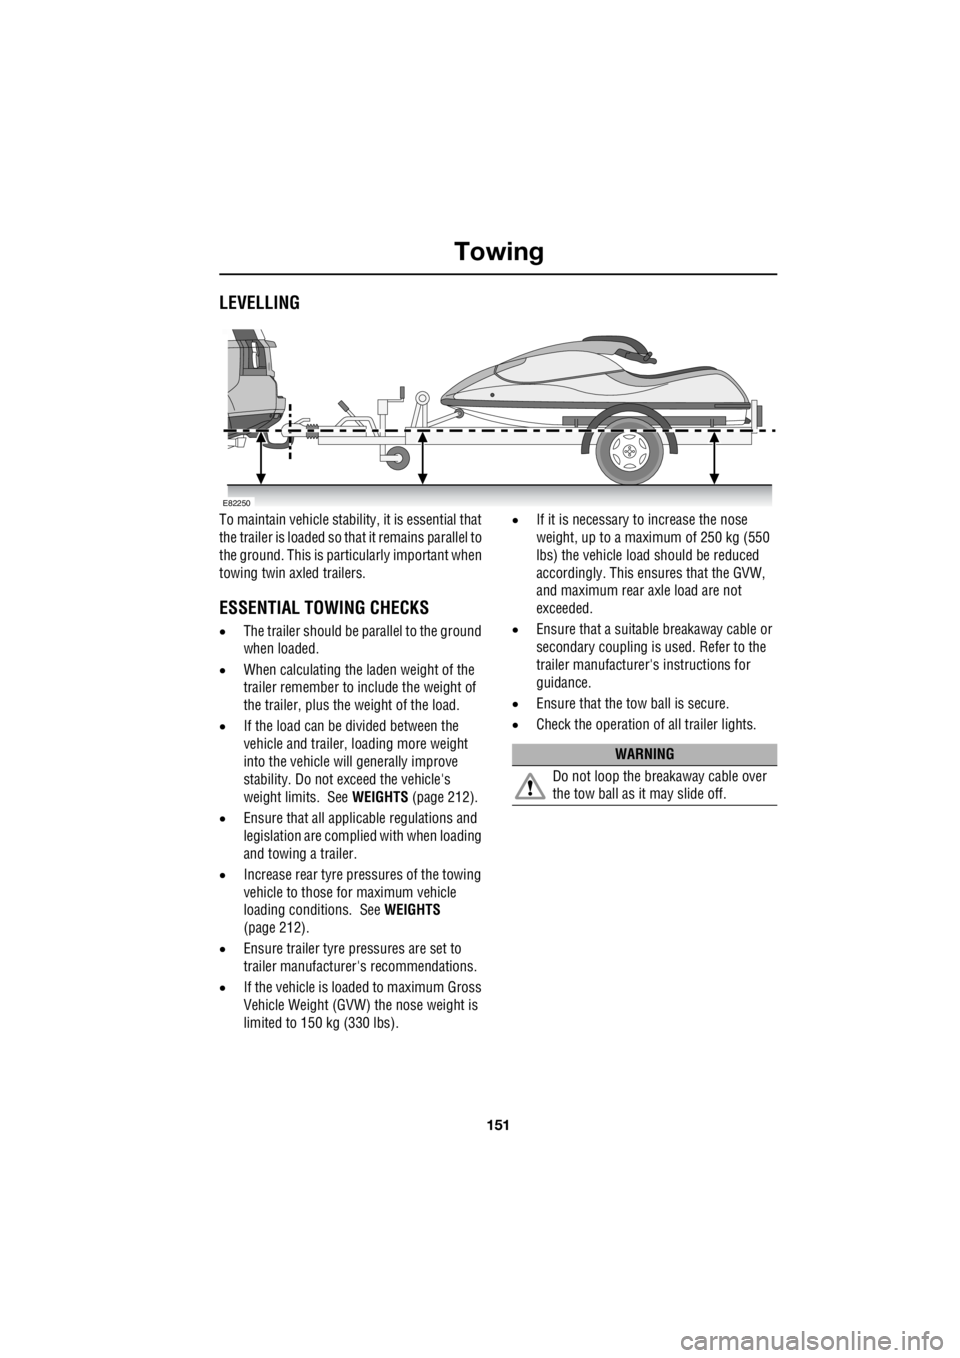 LAND ROVER FRELANDER 2 2006  Repair Manual 151
Towing
R
LEVELLING
To maintain vehicle stability, it is essential that  
the trailer is loaded so that it remains parallel to 
the ground. This is partic  ularly important when  
towing twin axled